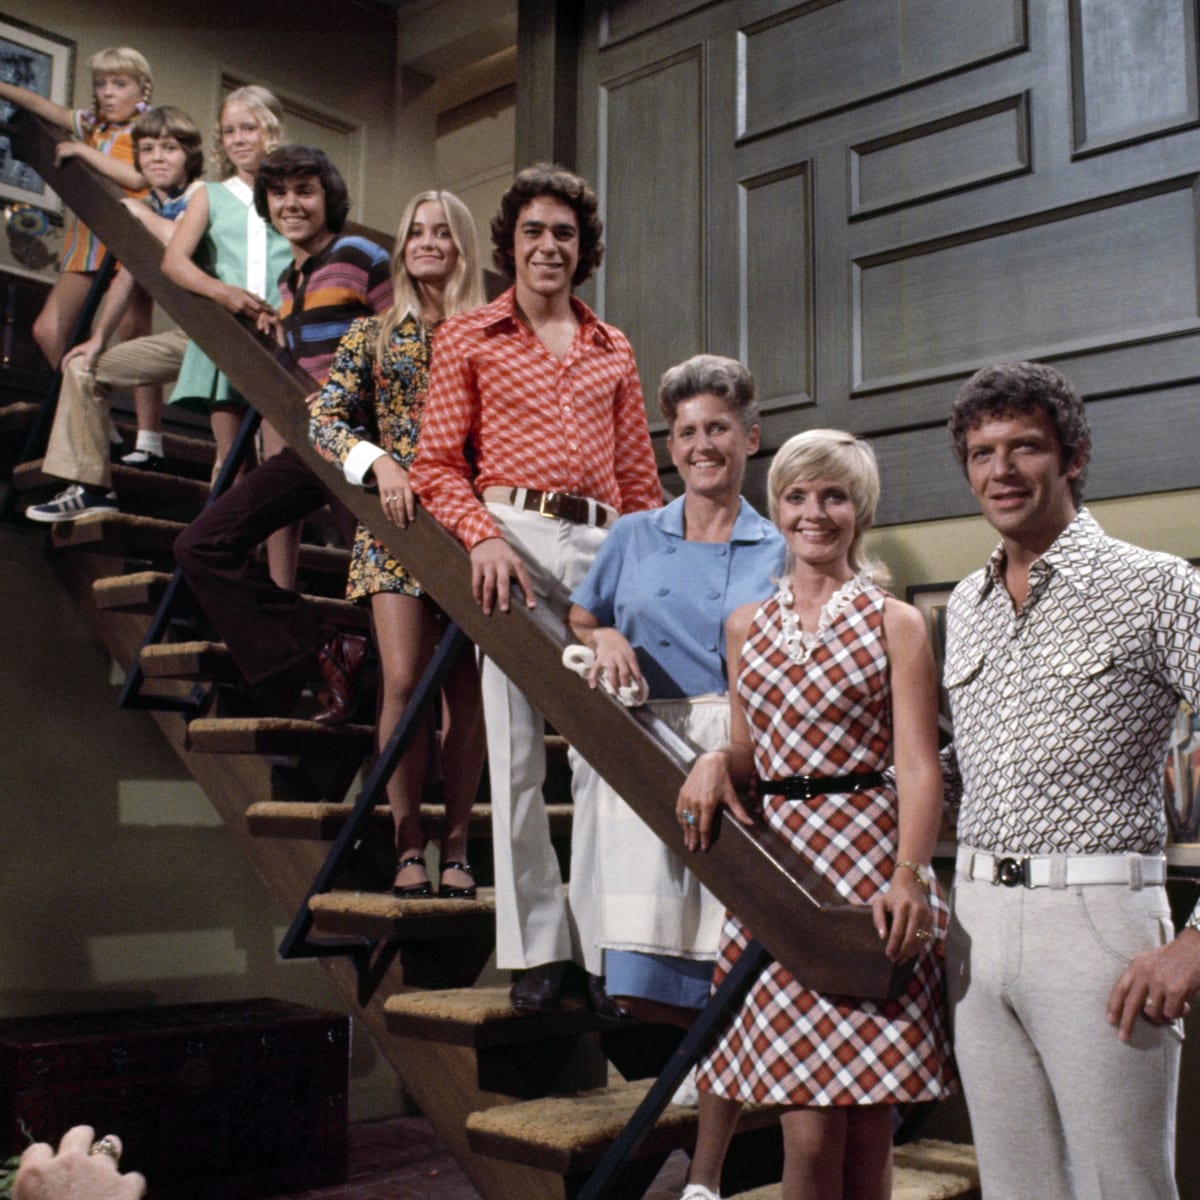 The Brady Bunch Barry Williams Dated His TV Mother Florence Henderson and Had an Affair With Maureen McCormick!